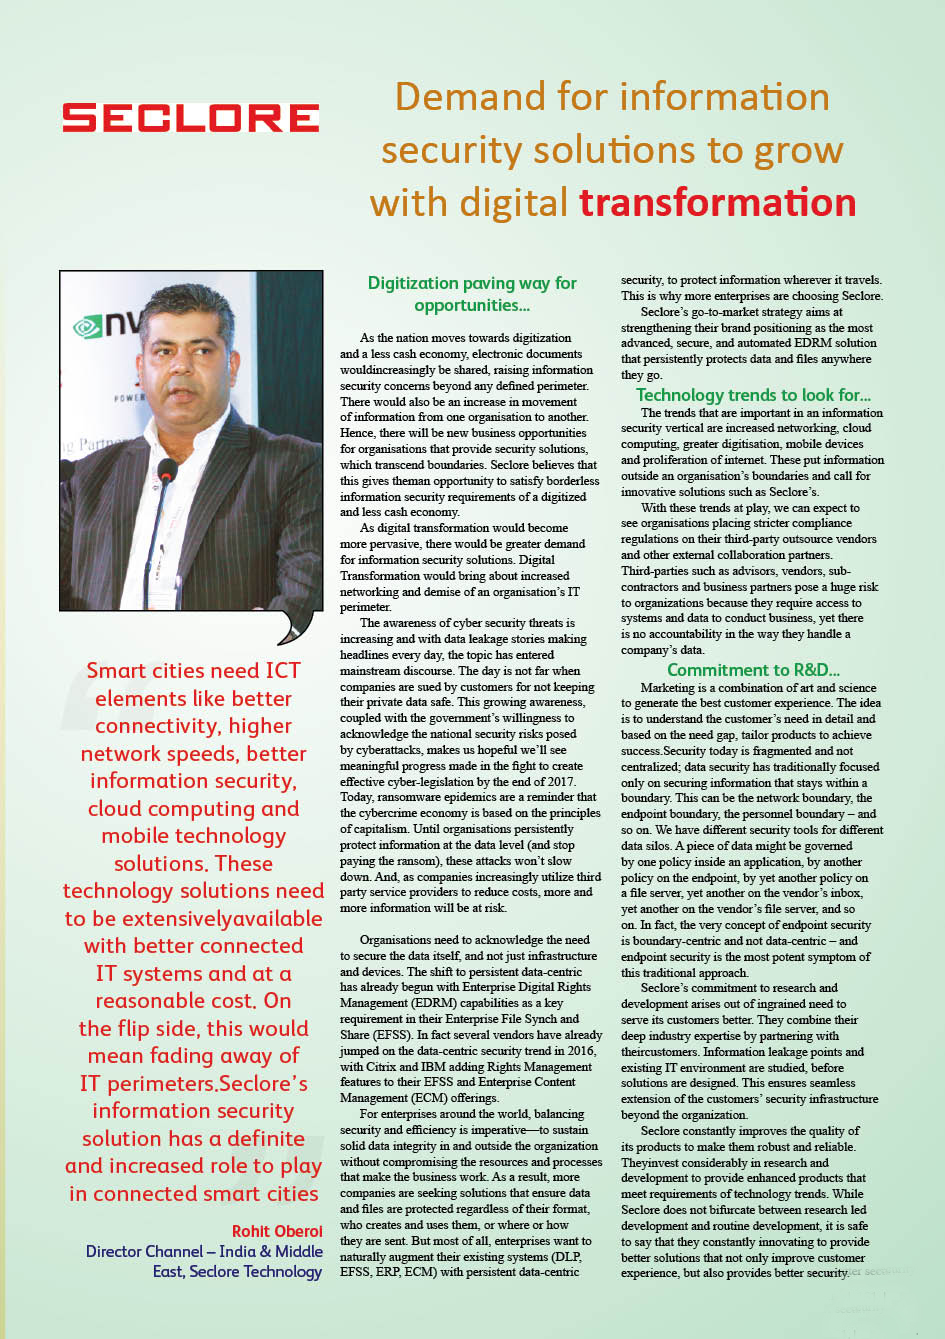 Seclore Technology : Demand for information security solutions to grow with digital transformation
